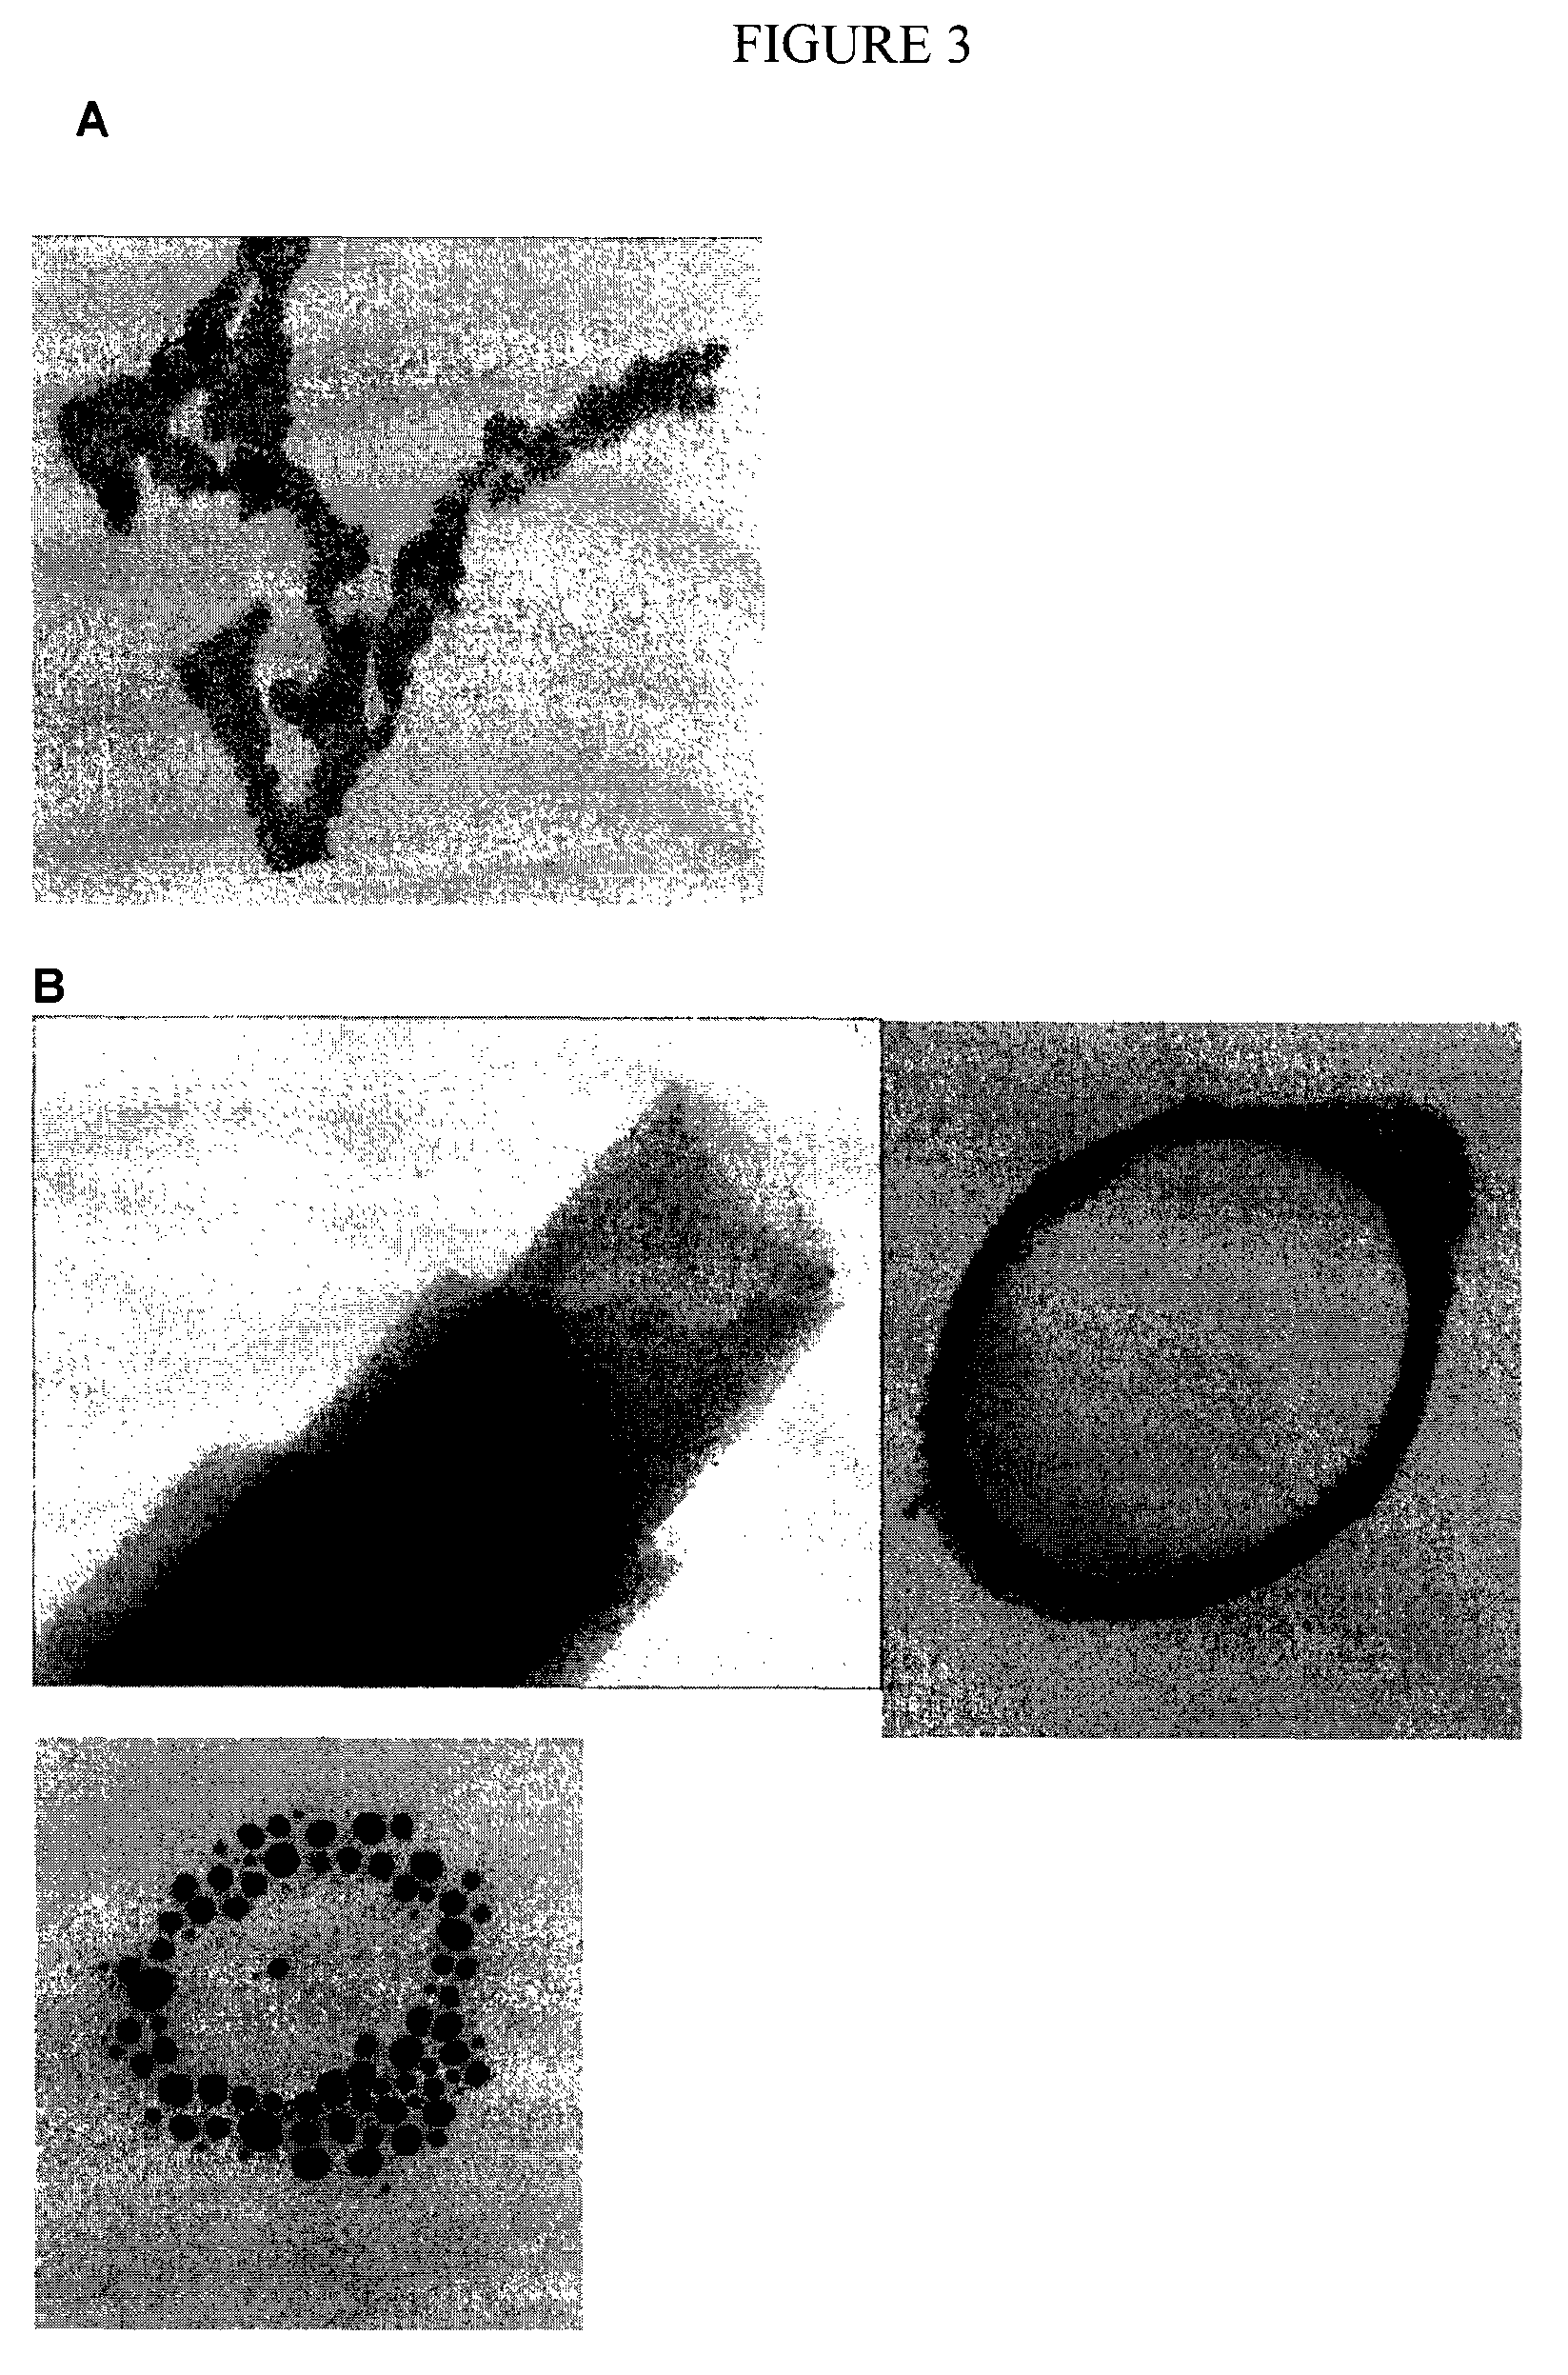 Chelating silicon-based polymers